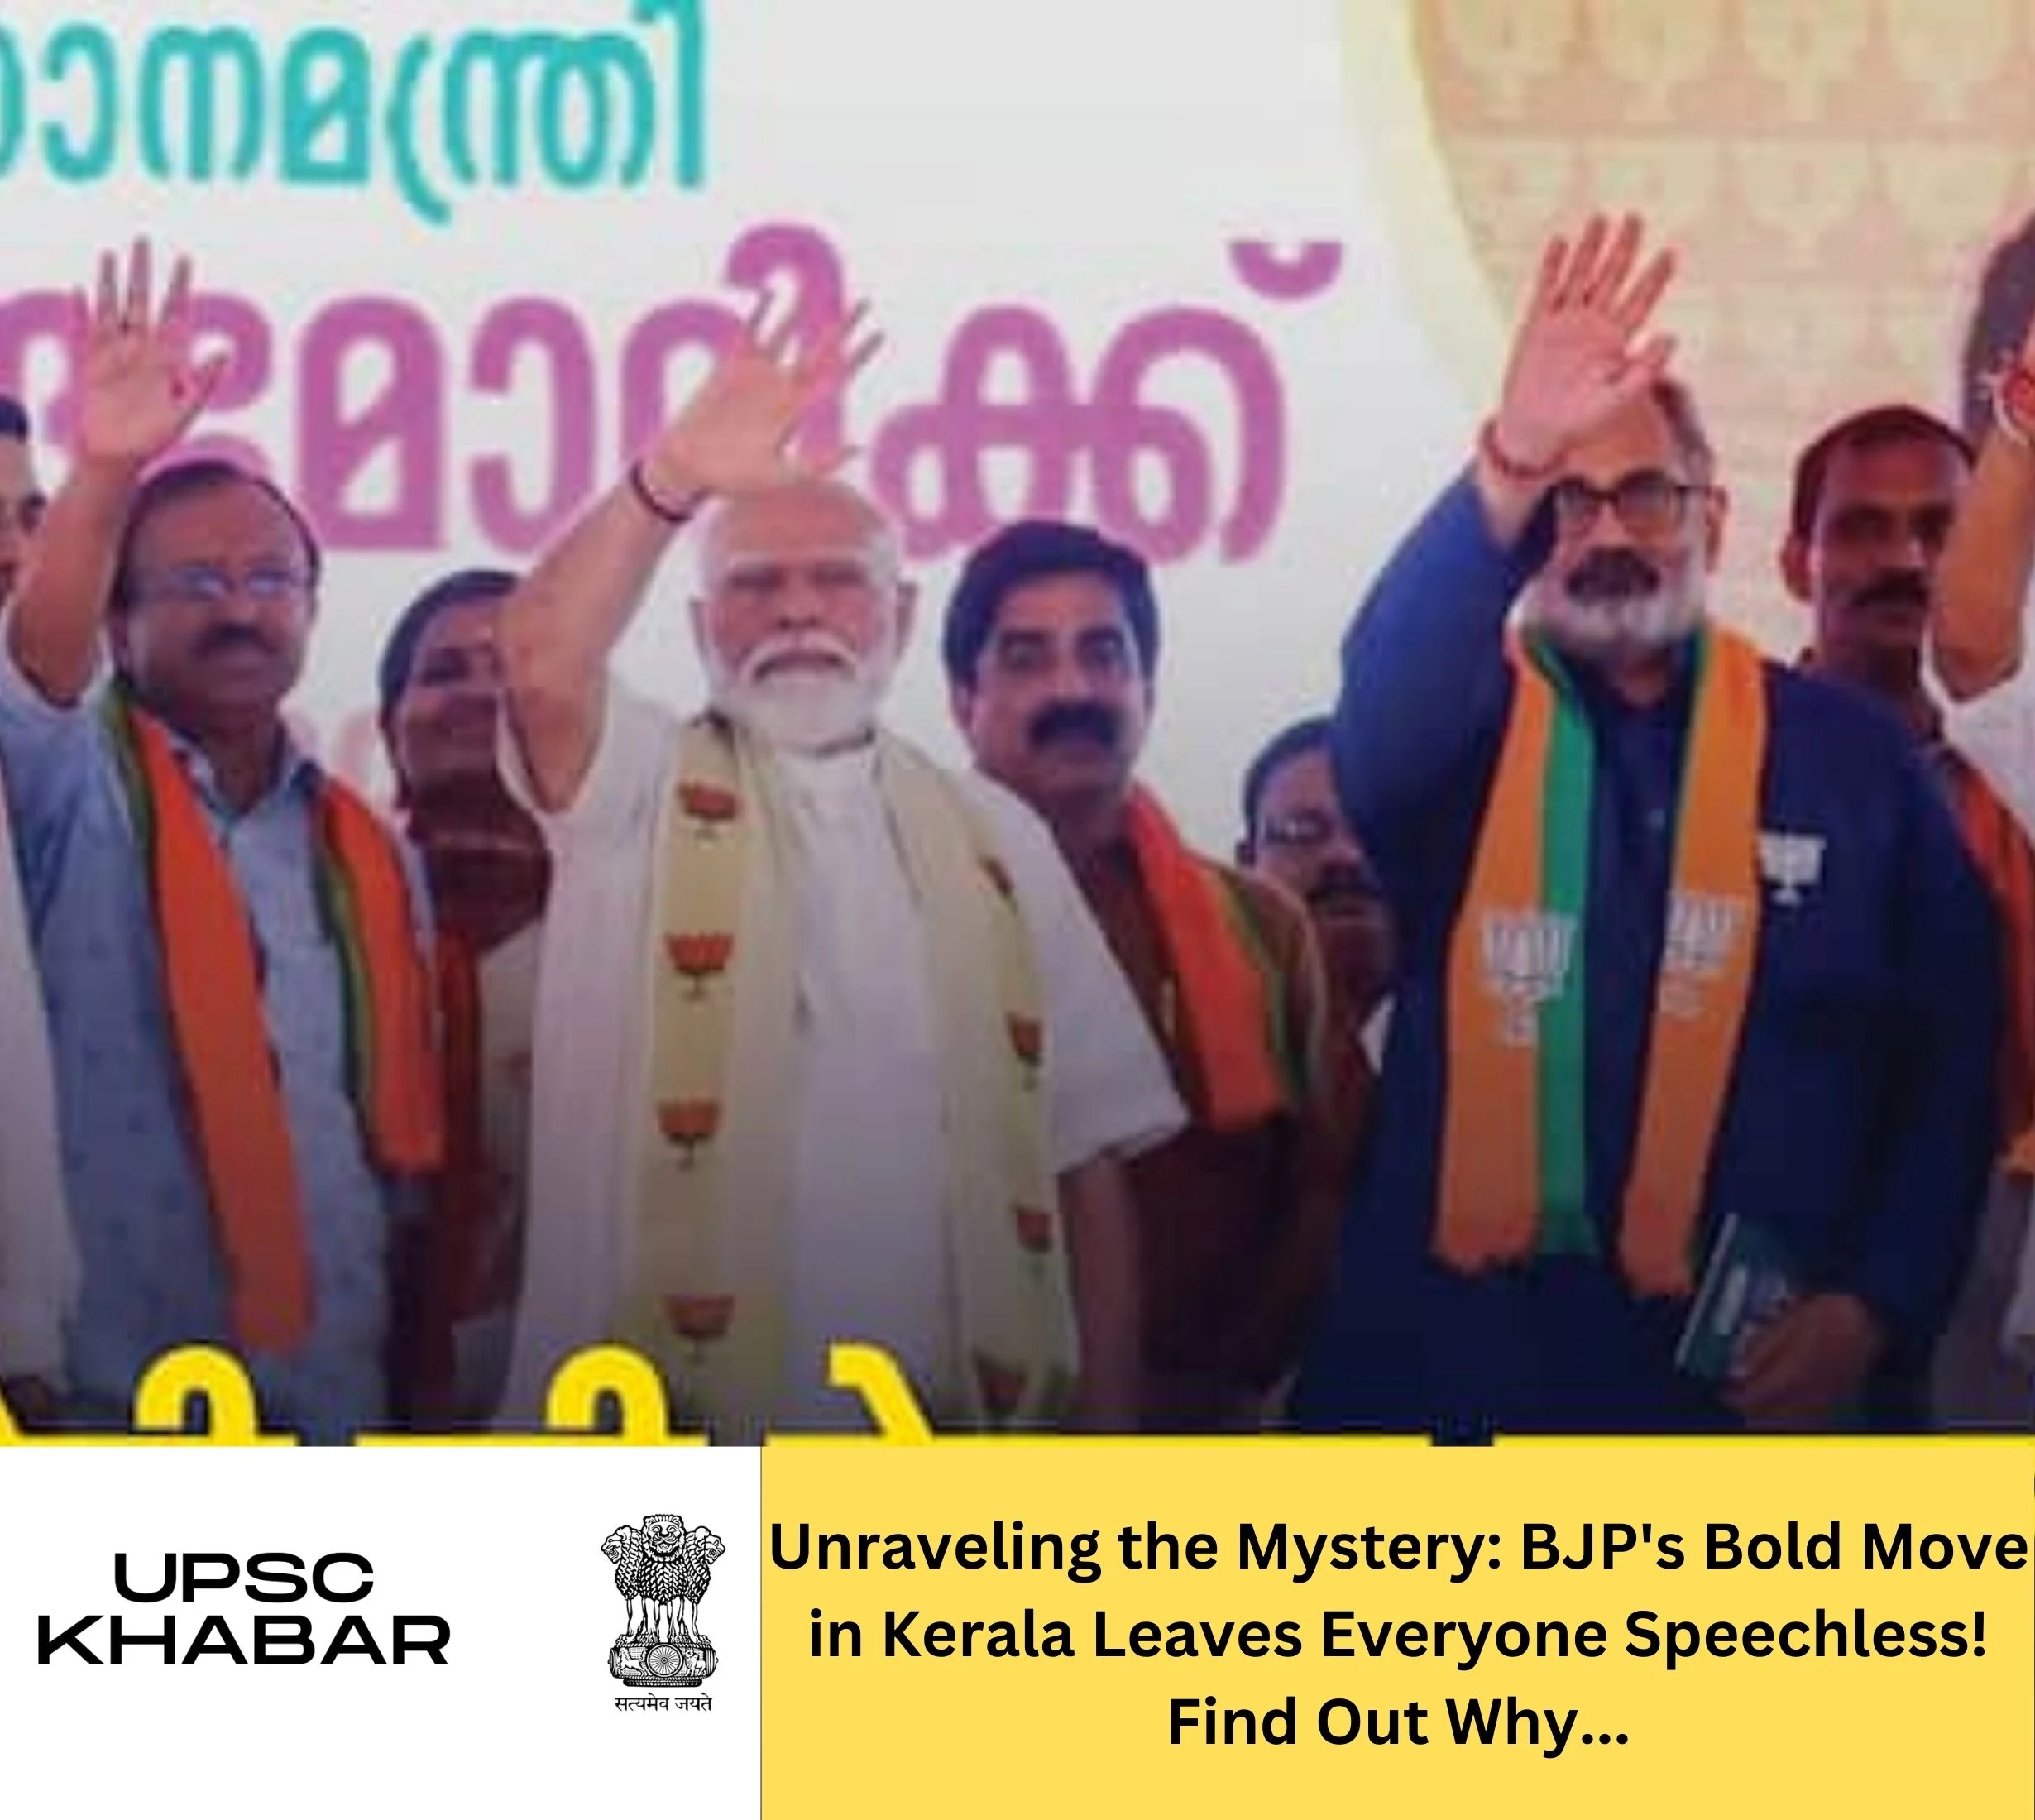 Unraveling the Mystery: BJP's Bold Move in Kerala Leaves Everyone Speechless! Find Out Why...